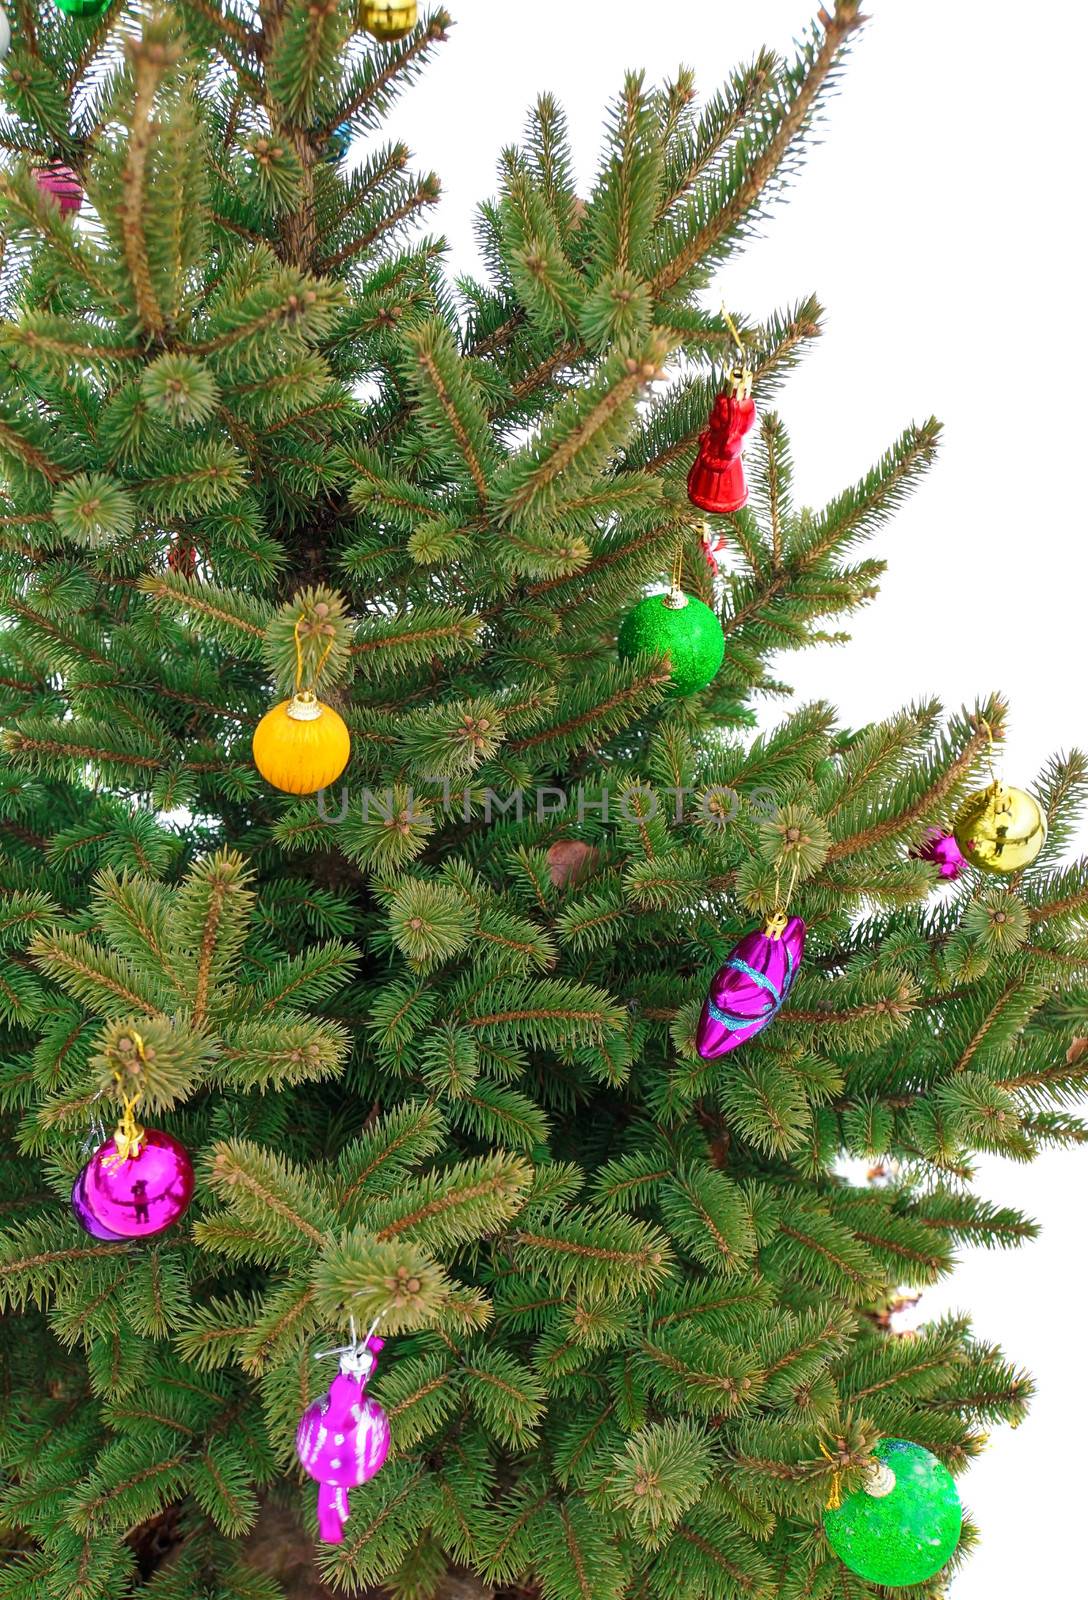 Christmas tree decorated with toys close-up